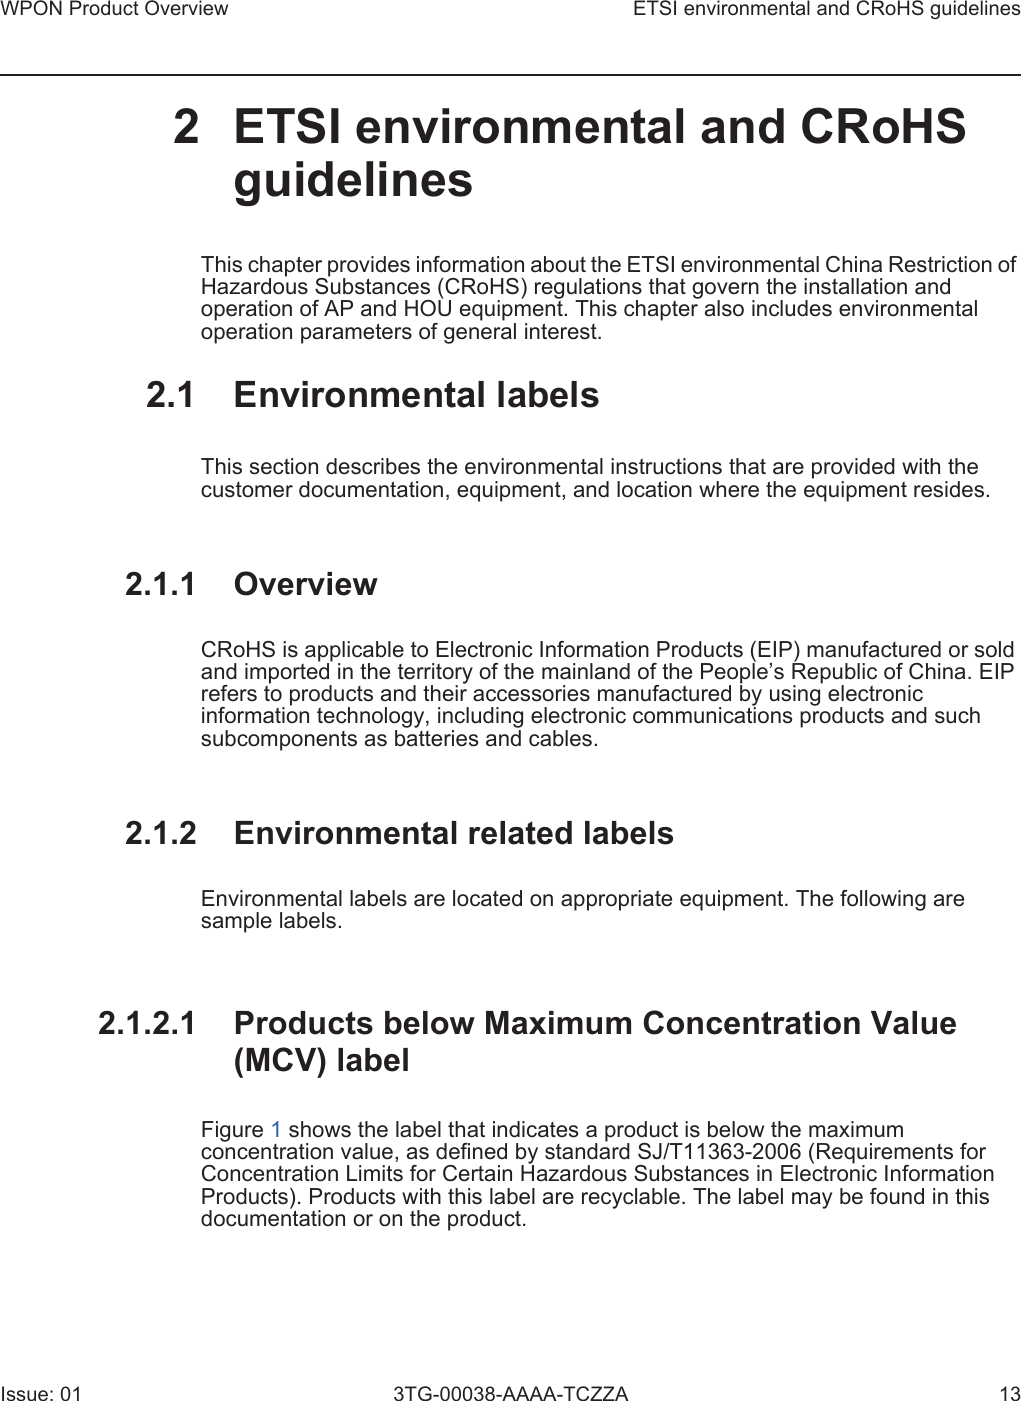 WPON Product Overview ETSI environmental and CRoHS guidelinesIssue: 01 3TG-00038-AAAA-TCZZA 132 ETSI environmental and CRoHS guidelinesThis chapter provides information about the ETSI environmental China Restriction of Hazardous Substances (CRoHS) regulations that govern the installation and operation of AP and HOU equipment. This chapter also includes environmental operation parameters of general interest. 2.1 Environmental labelsThis section describes the environmental instructions that are provided with the customer documentation, equipment, and location where the equipment resides.2.1.1 OverviewCRoHS is applicable to Electronic Information Products (EIP) manufactured or sold and imported in the territory of the mainland of the People’s Republic of China. EIP refers to products and their accessories manufactured by using electronic information technology, including electronic communications products and such subcomponents as batteries and cables.2.1.2 Environmental related labelsEnvironmental labels are located on appropriate equipment. The following are sample labels.2.1.2.1 Products below Maximum Concentration Value (MCV) labelFigure 1 shows the label that indicates a product is below the maximum concentration value, as defined by standard SJ/T11363-2006 (Requirements for Concentration Limits for Certain Hazardous Substances in Electronic Information Products). Products with this label are recyclable. The label may be found in this documentation or on the product.